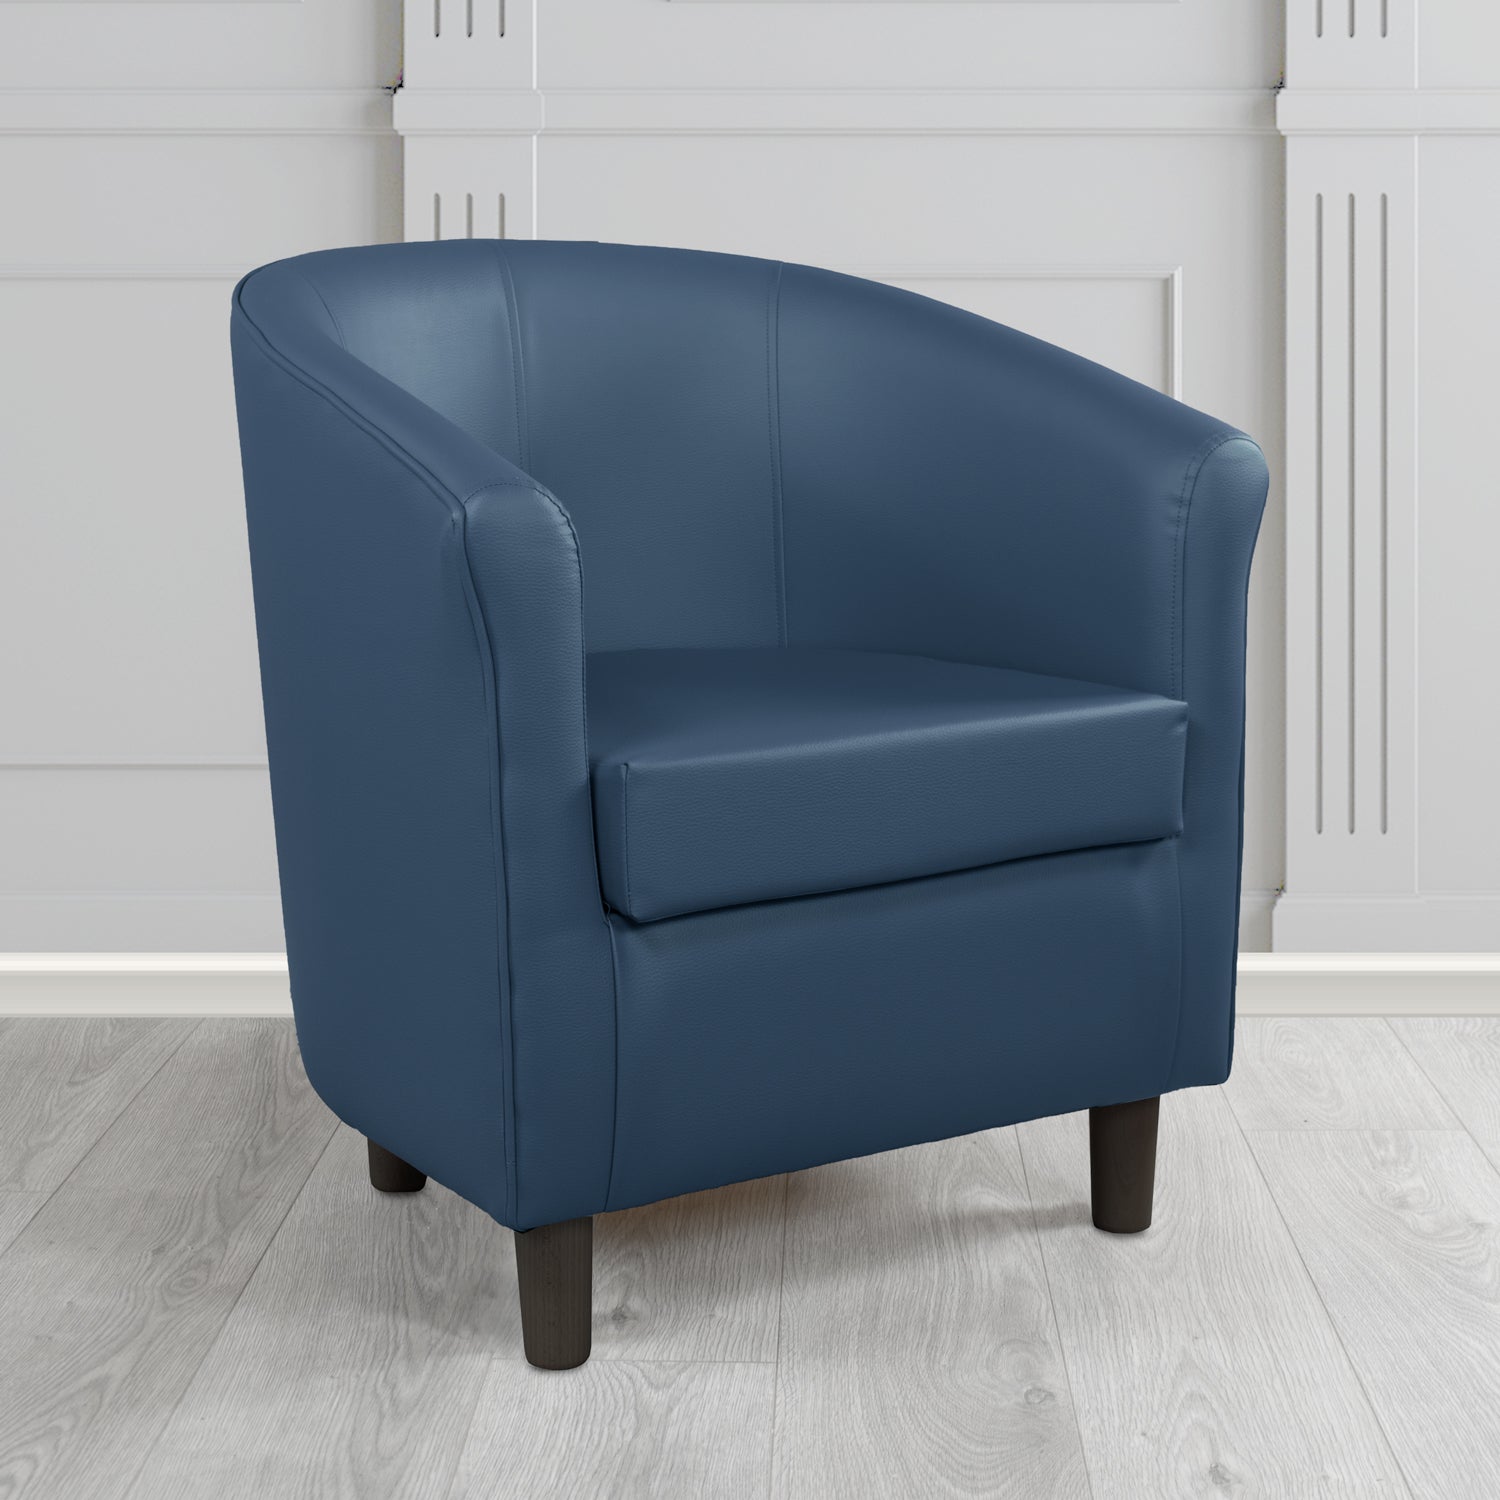 Tuscany Just Colour Sapphire Blue Antimicrobial Crib 5 Contract Faux Leather Tub Chair - The Tub Chair Shop